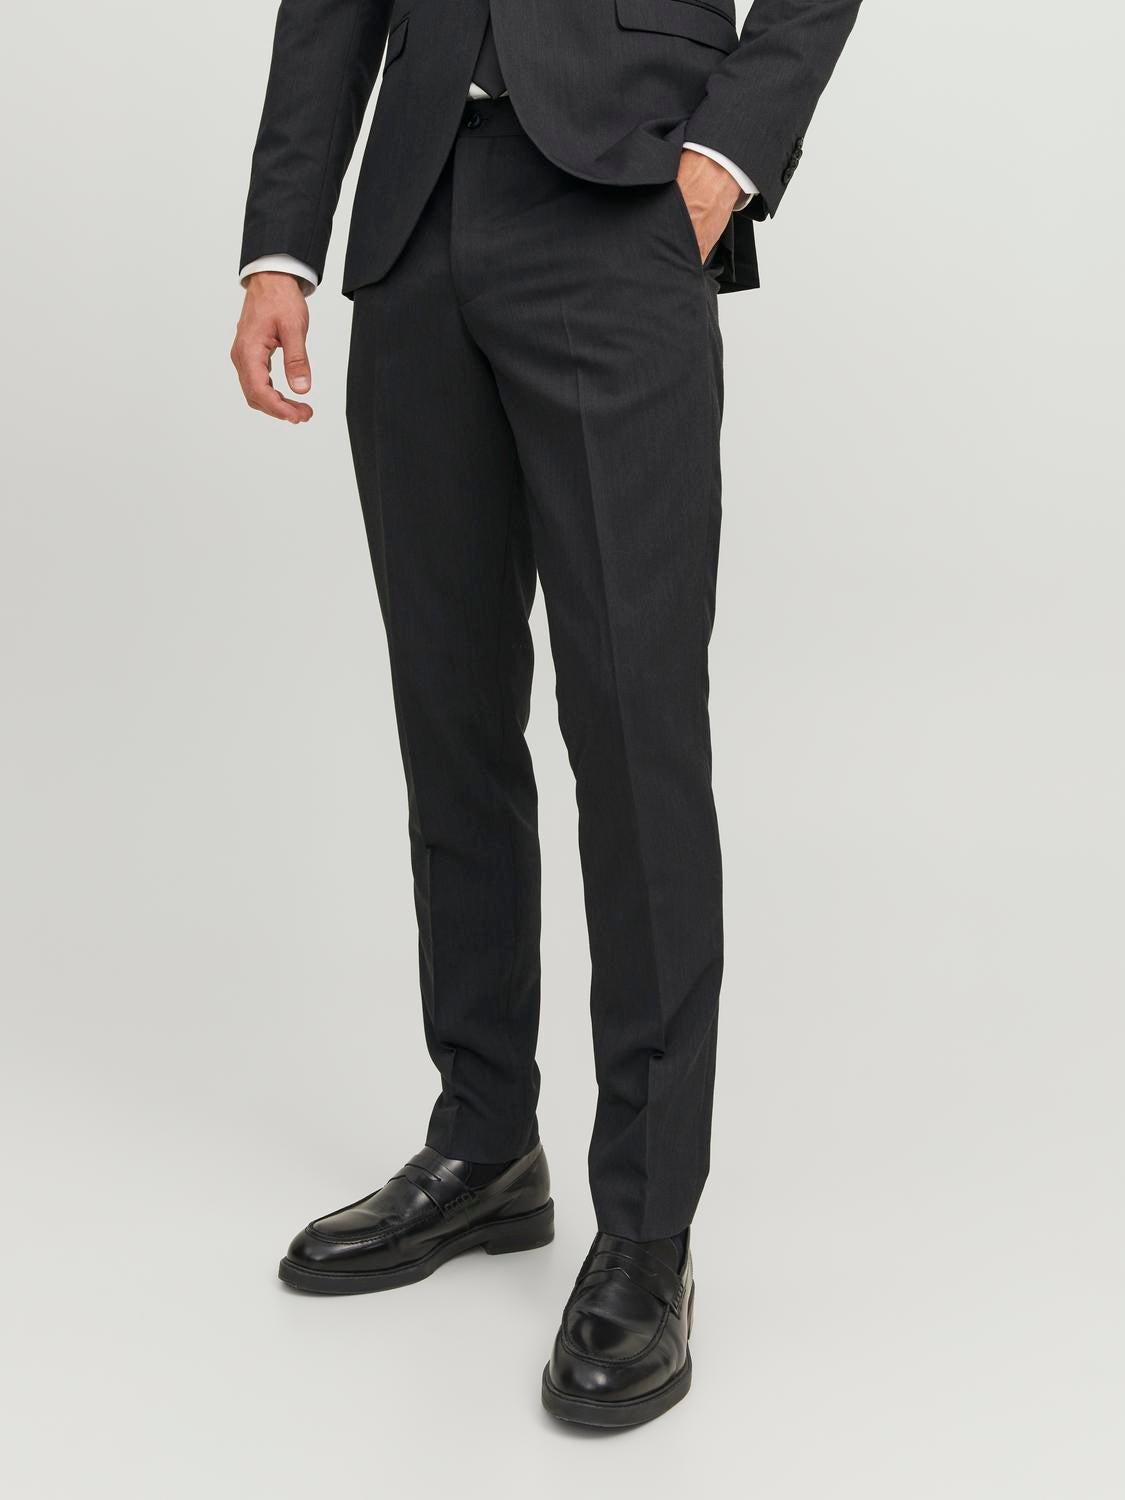 can a regular suit be tailored to slim fit